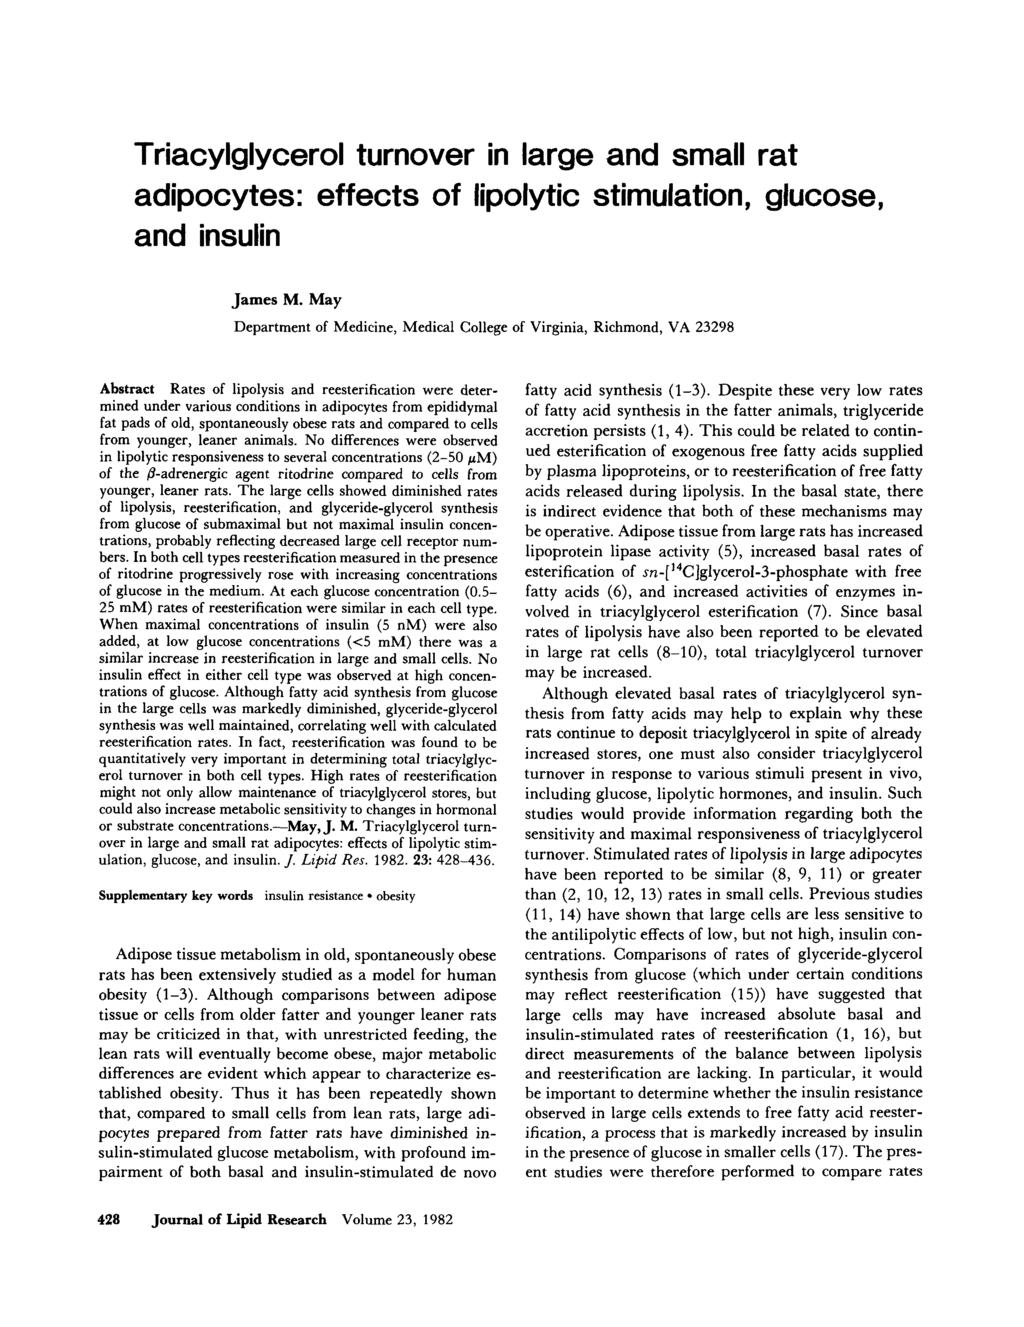 Triacylglycerol turnover in large and small rat adipocytes: effects of lipolytic stimulation, glucose, and insulin James M.